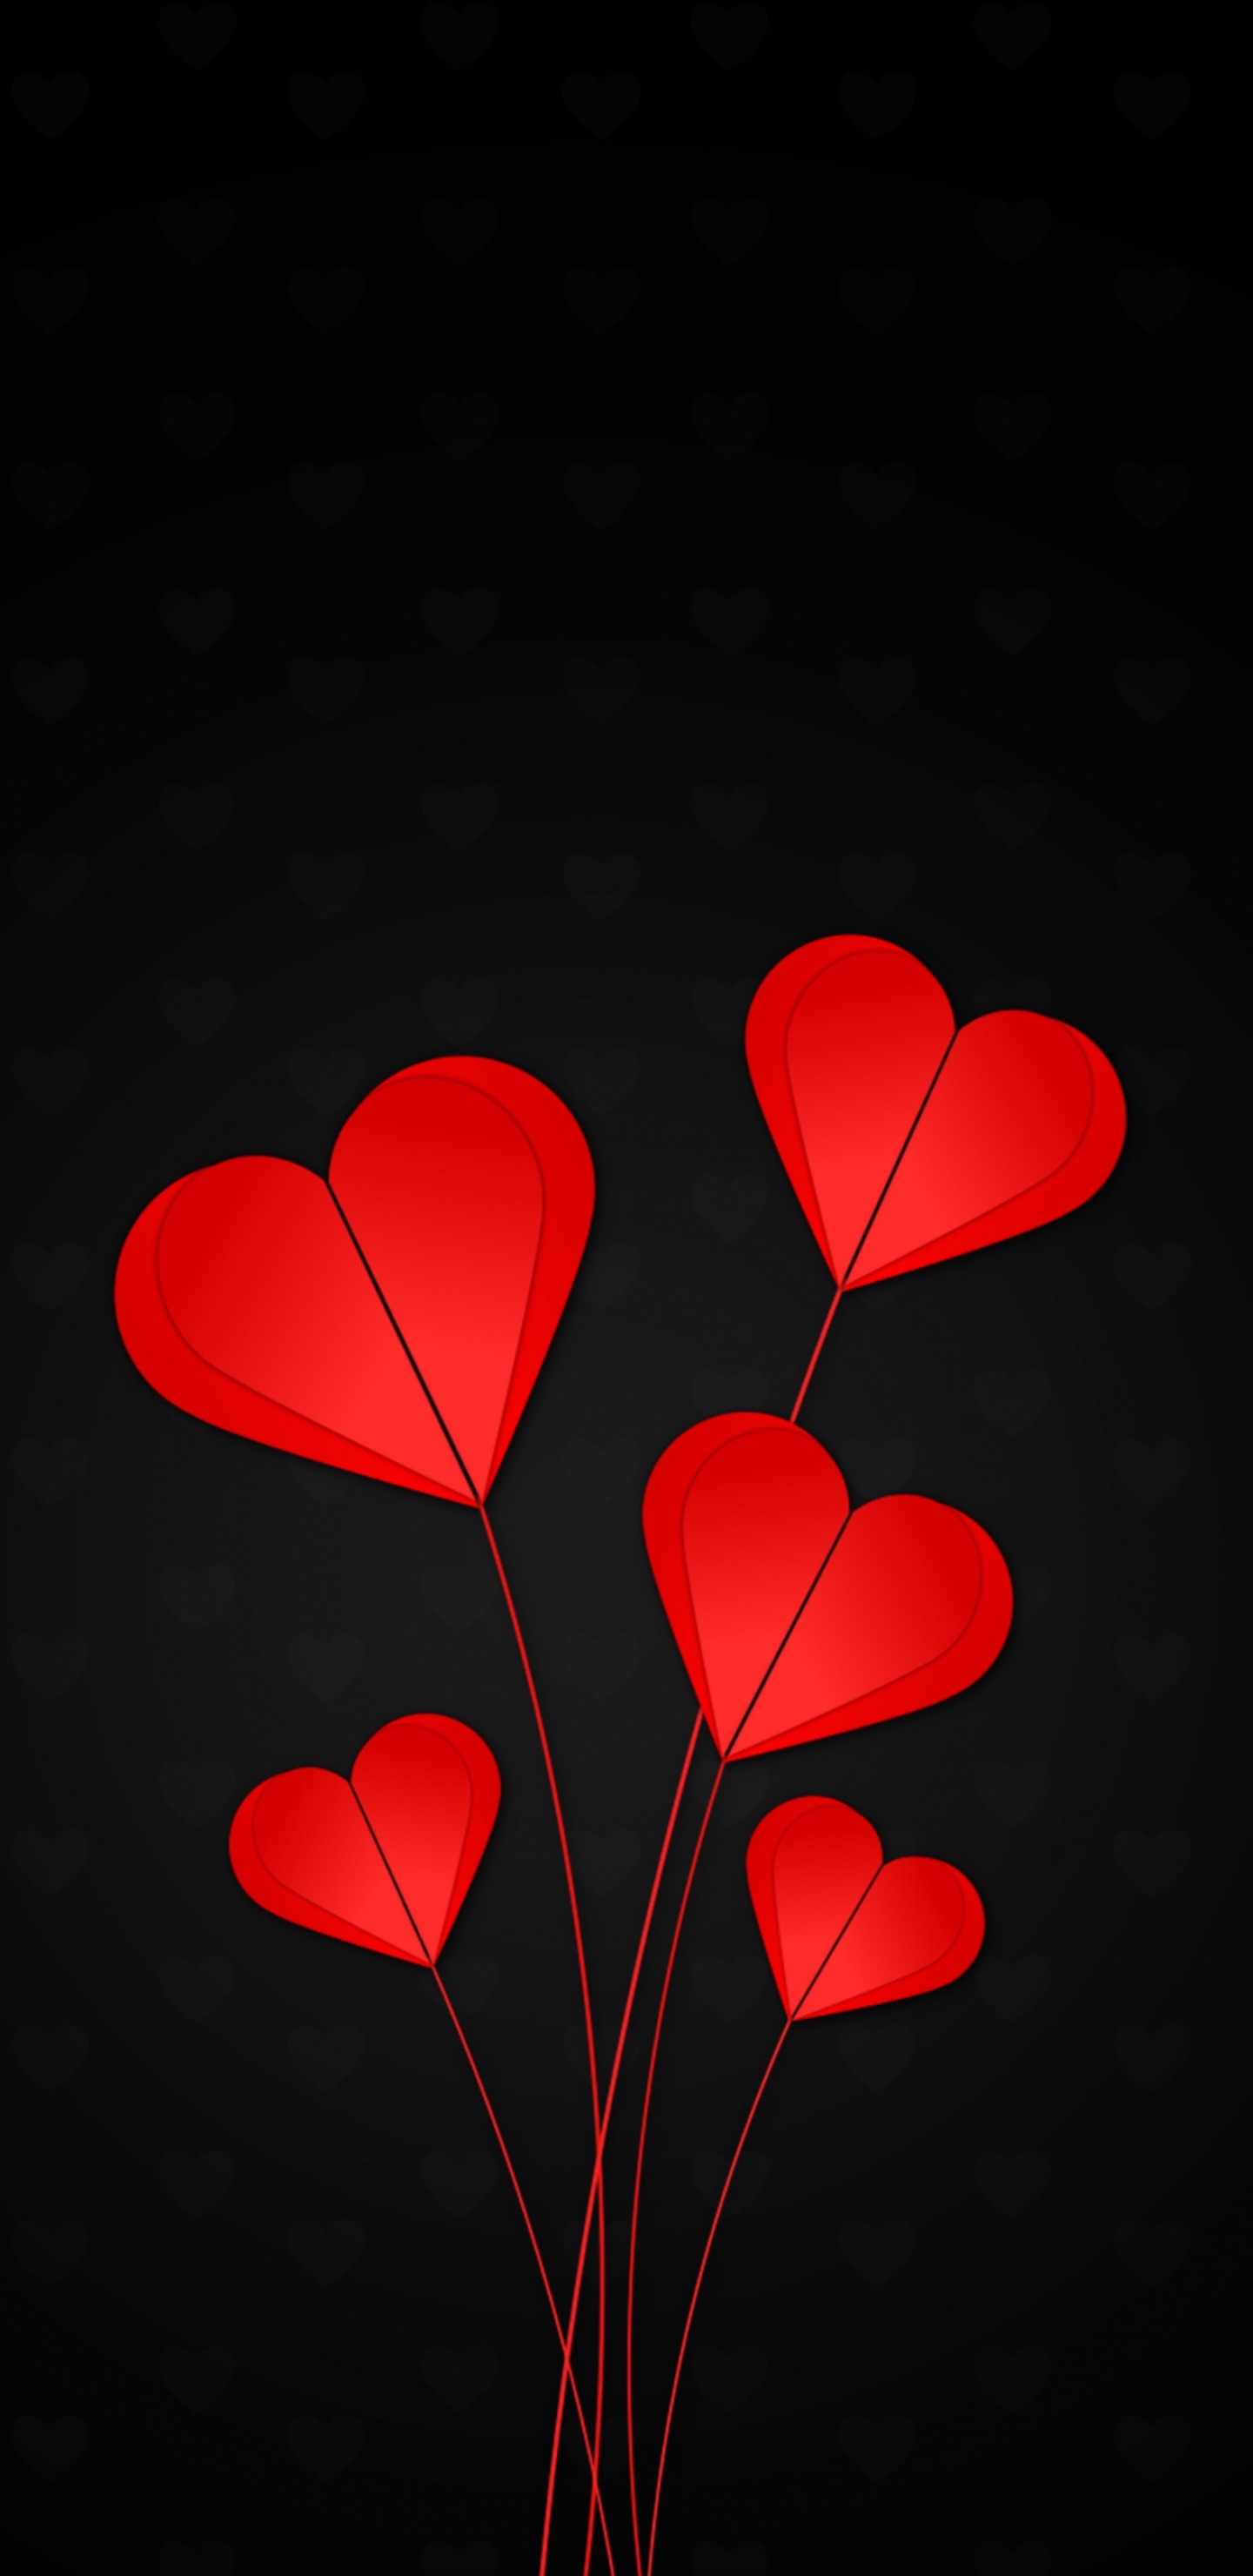 Heart, Red, Petal, Love, Valentines Day. Wallpaper in 1440x2960 Resolution